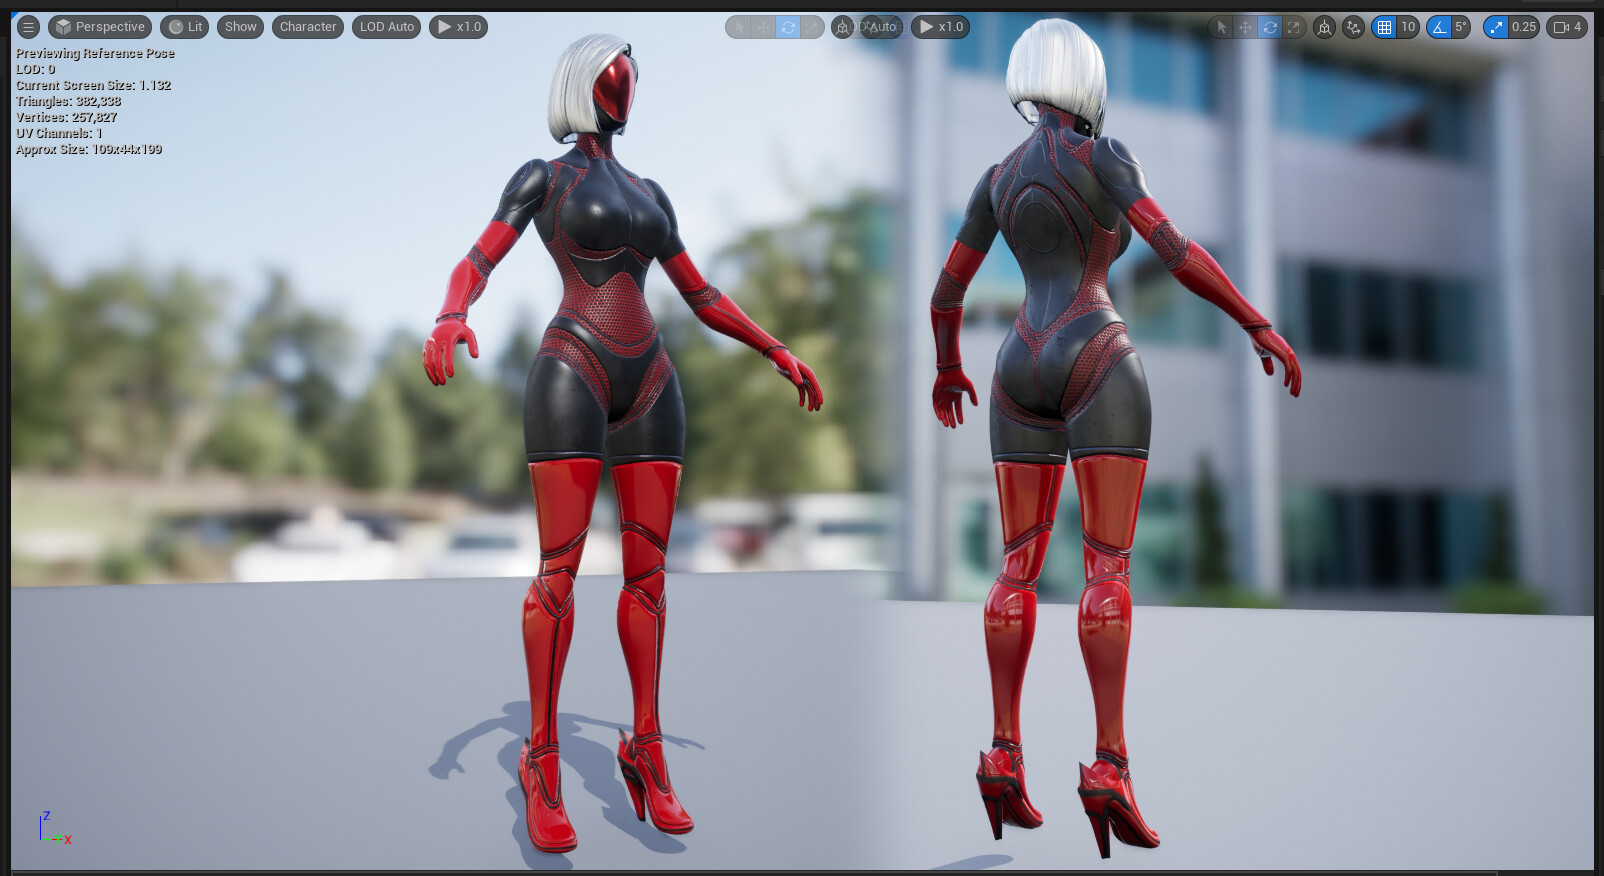 How to add Unreal breast physics to your characters. Using UE4, CC3. Works  for breasts and butts 